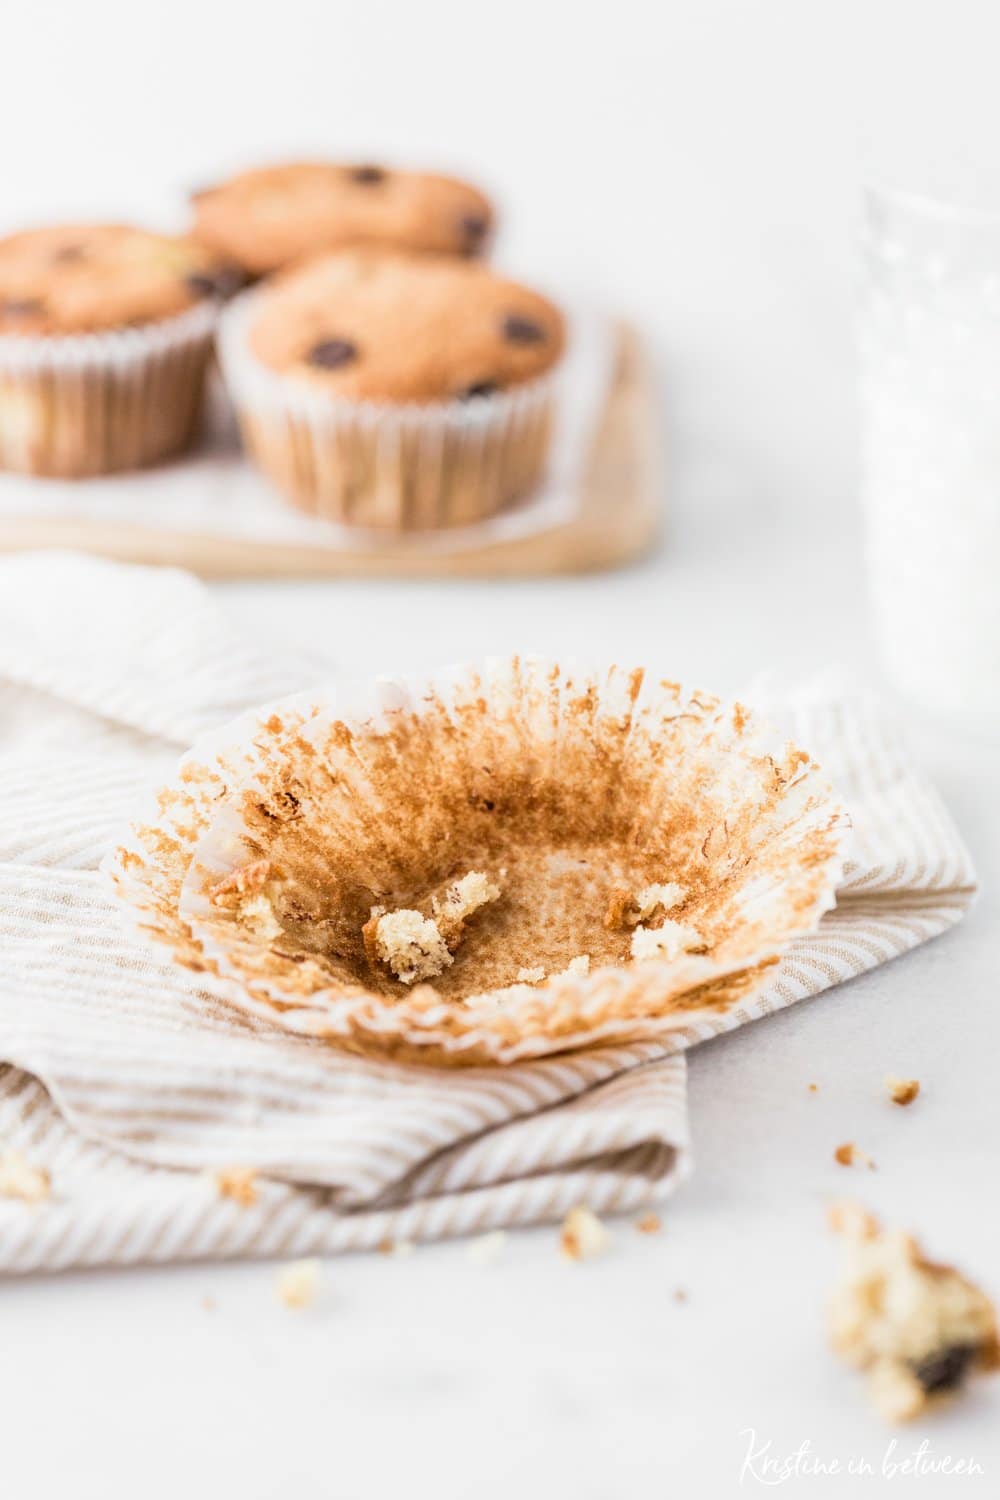 Super easy everyday chocolate chip banana bread muffins! They're light and fluffy and loaded with chocolate!